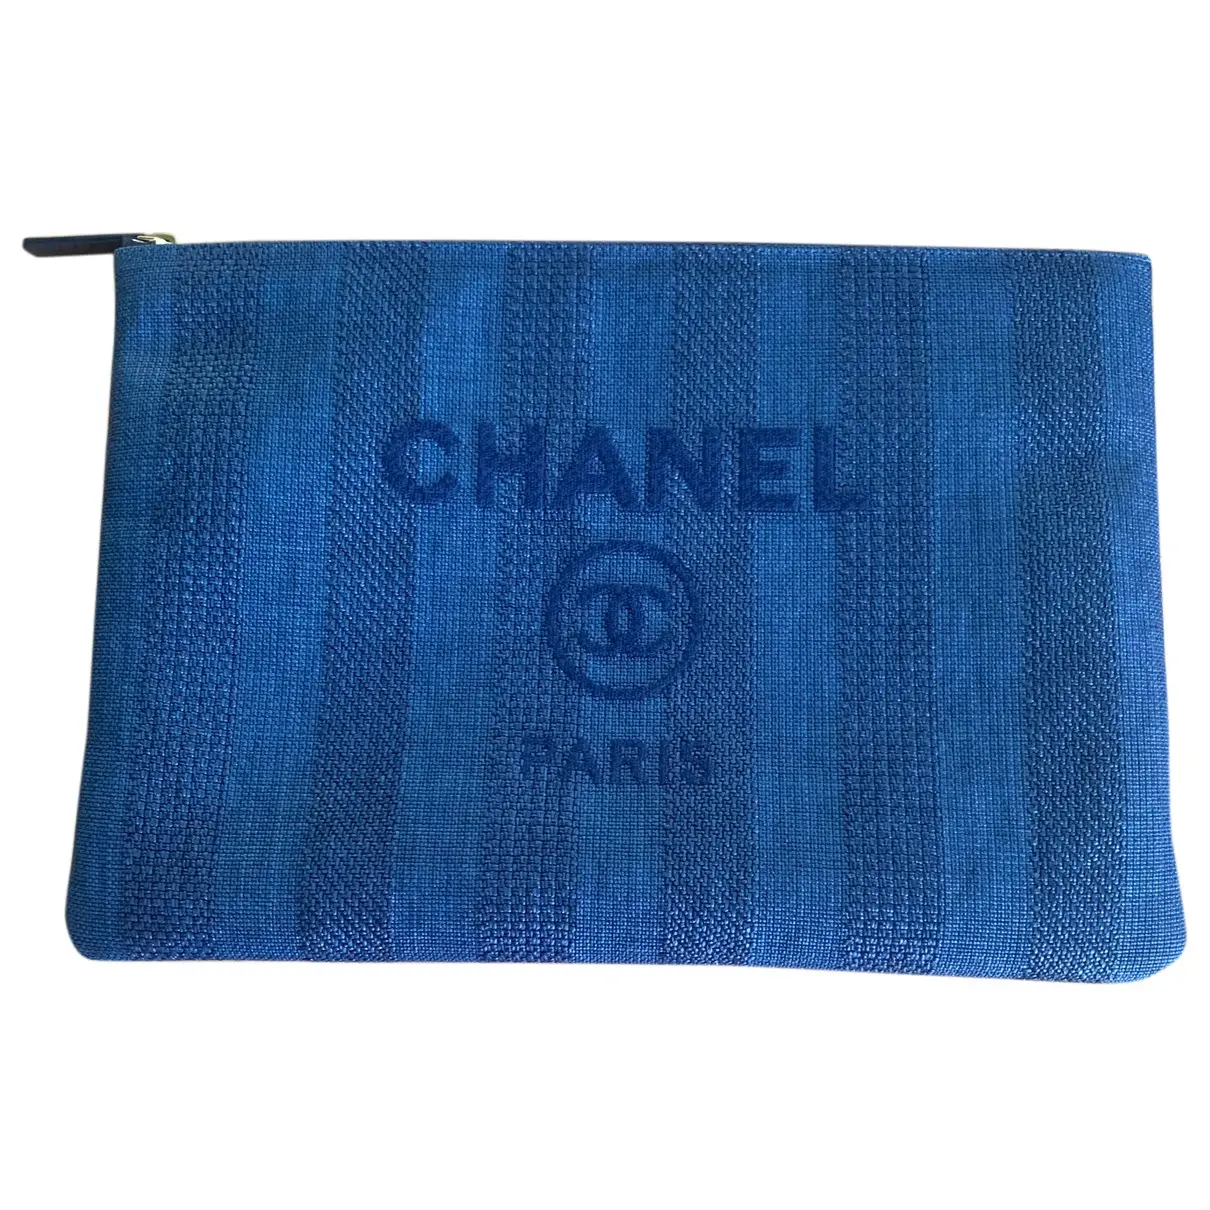 Deauville cloth clutch bag Chanel